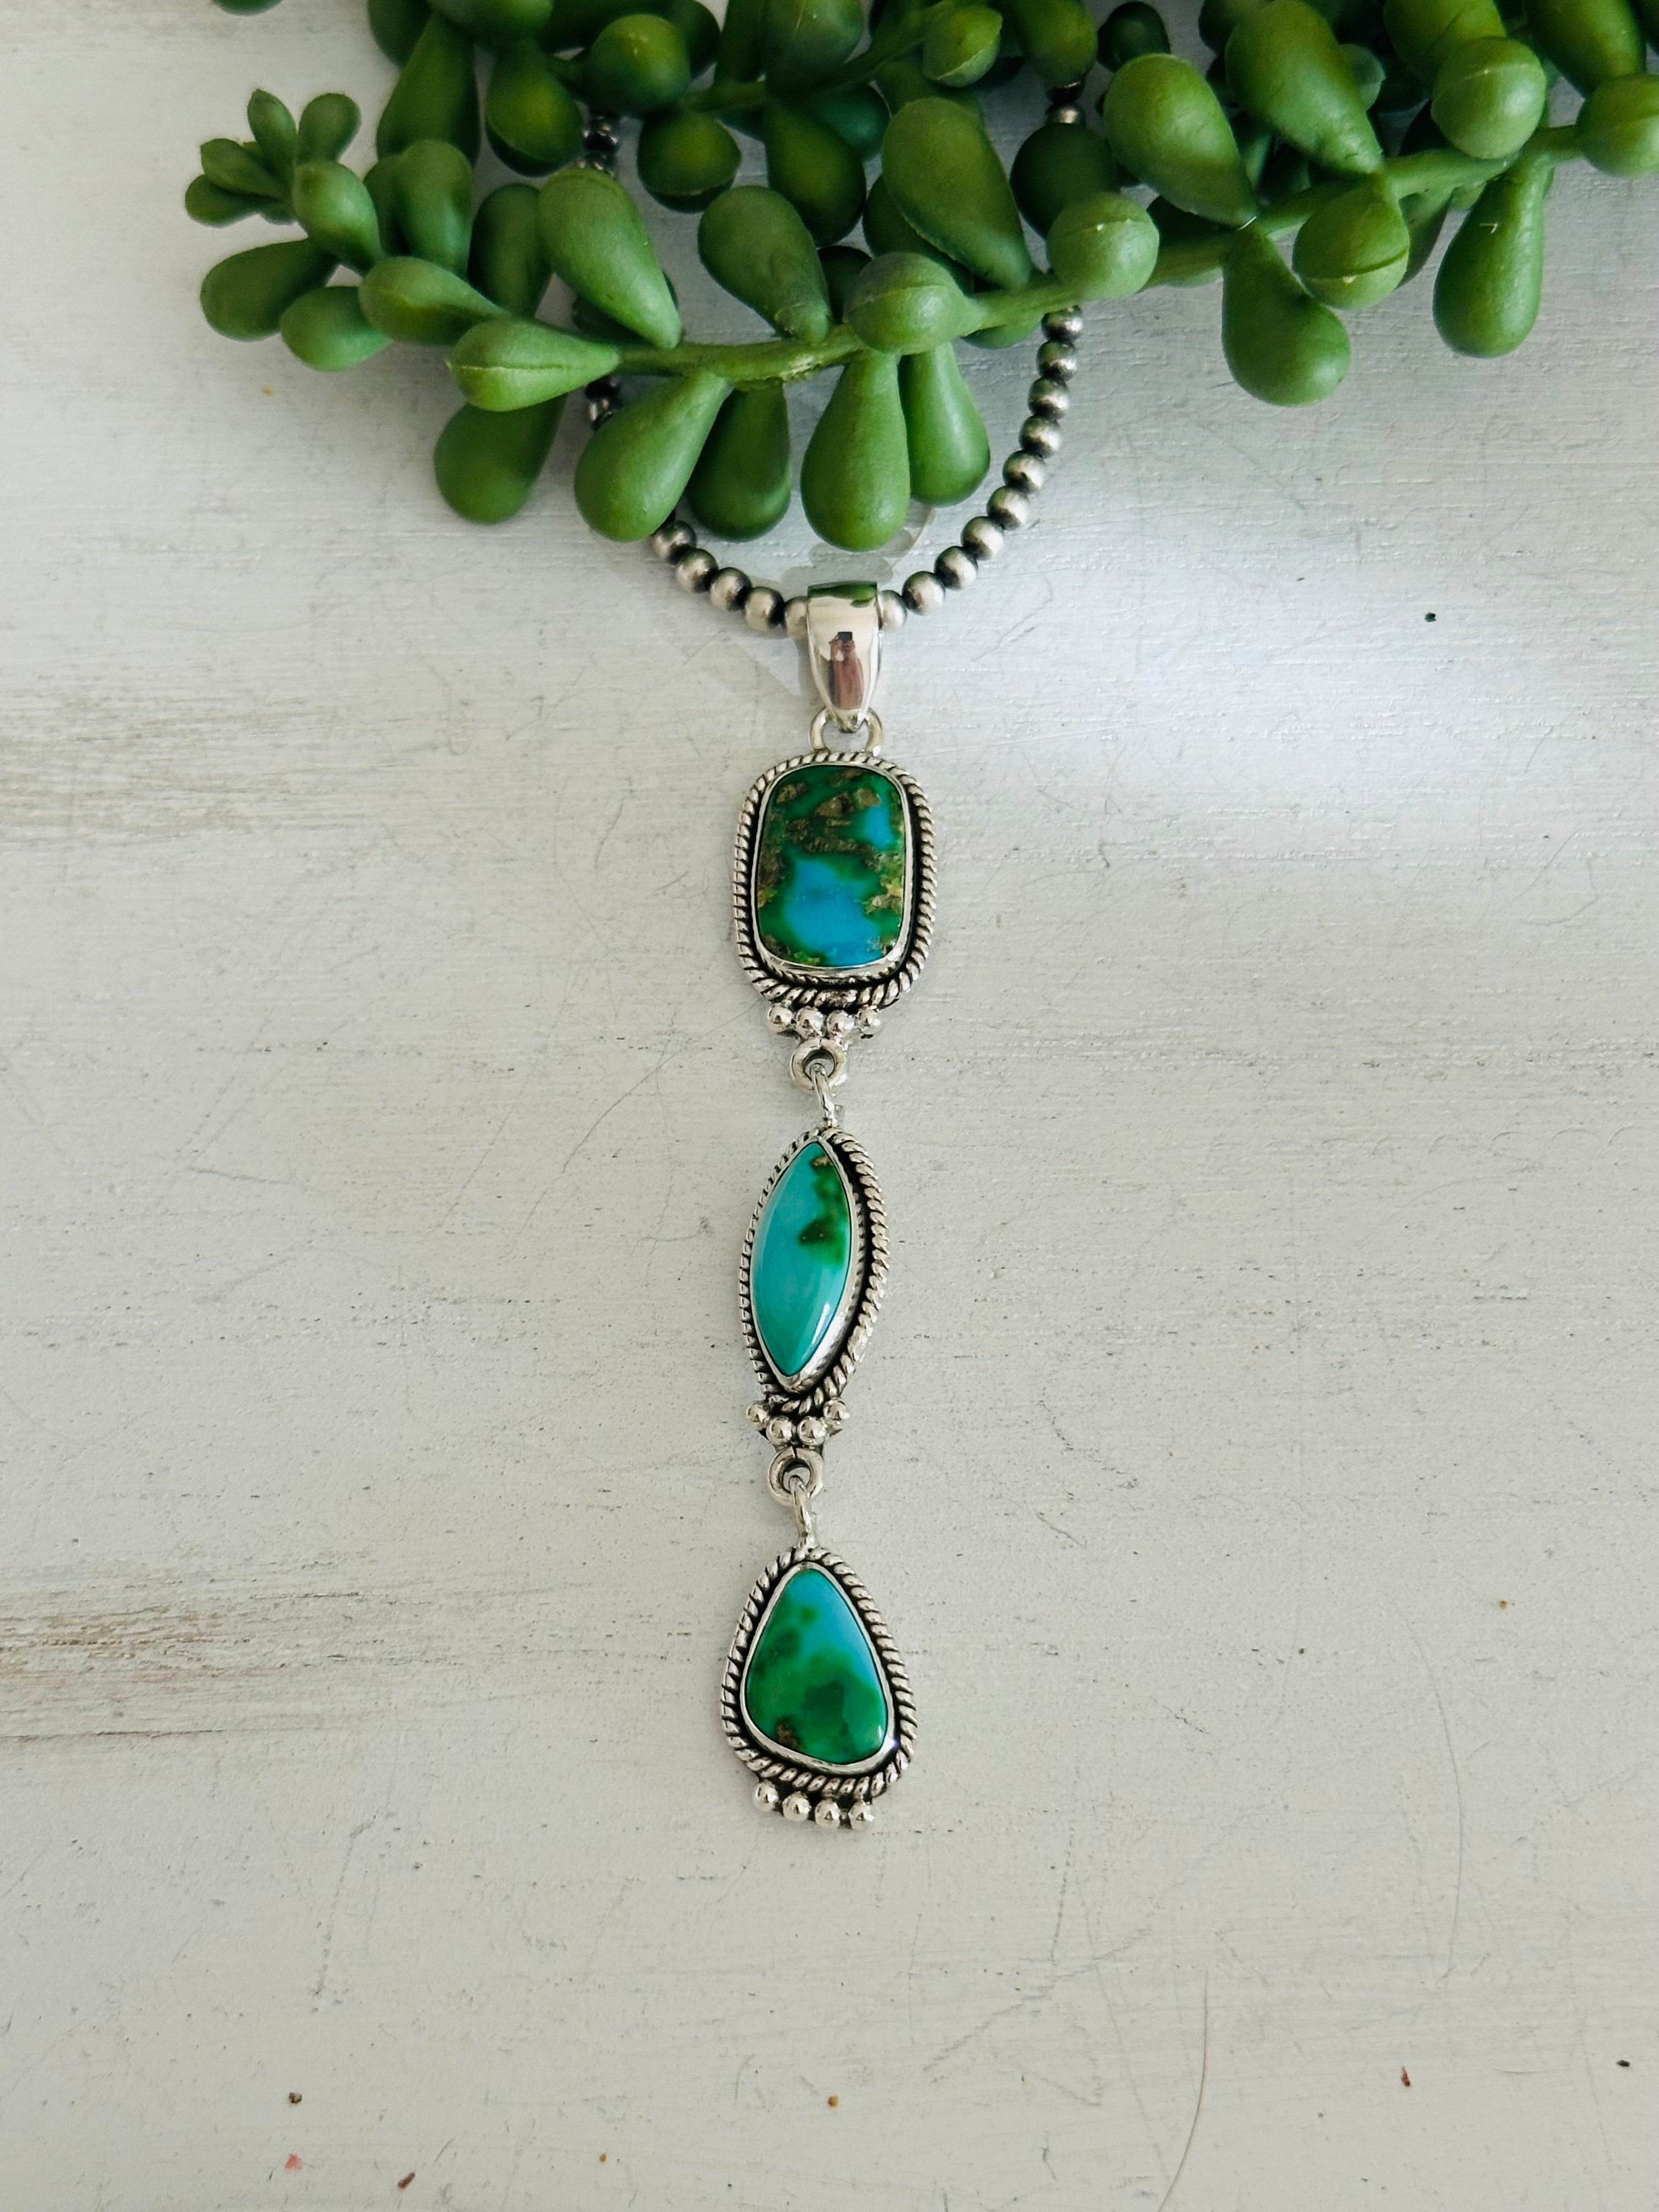 Southwest Handmade Sonoran Gold Turquoise & Sterling Silver Pendant